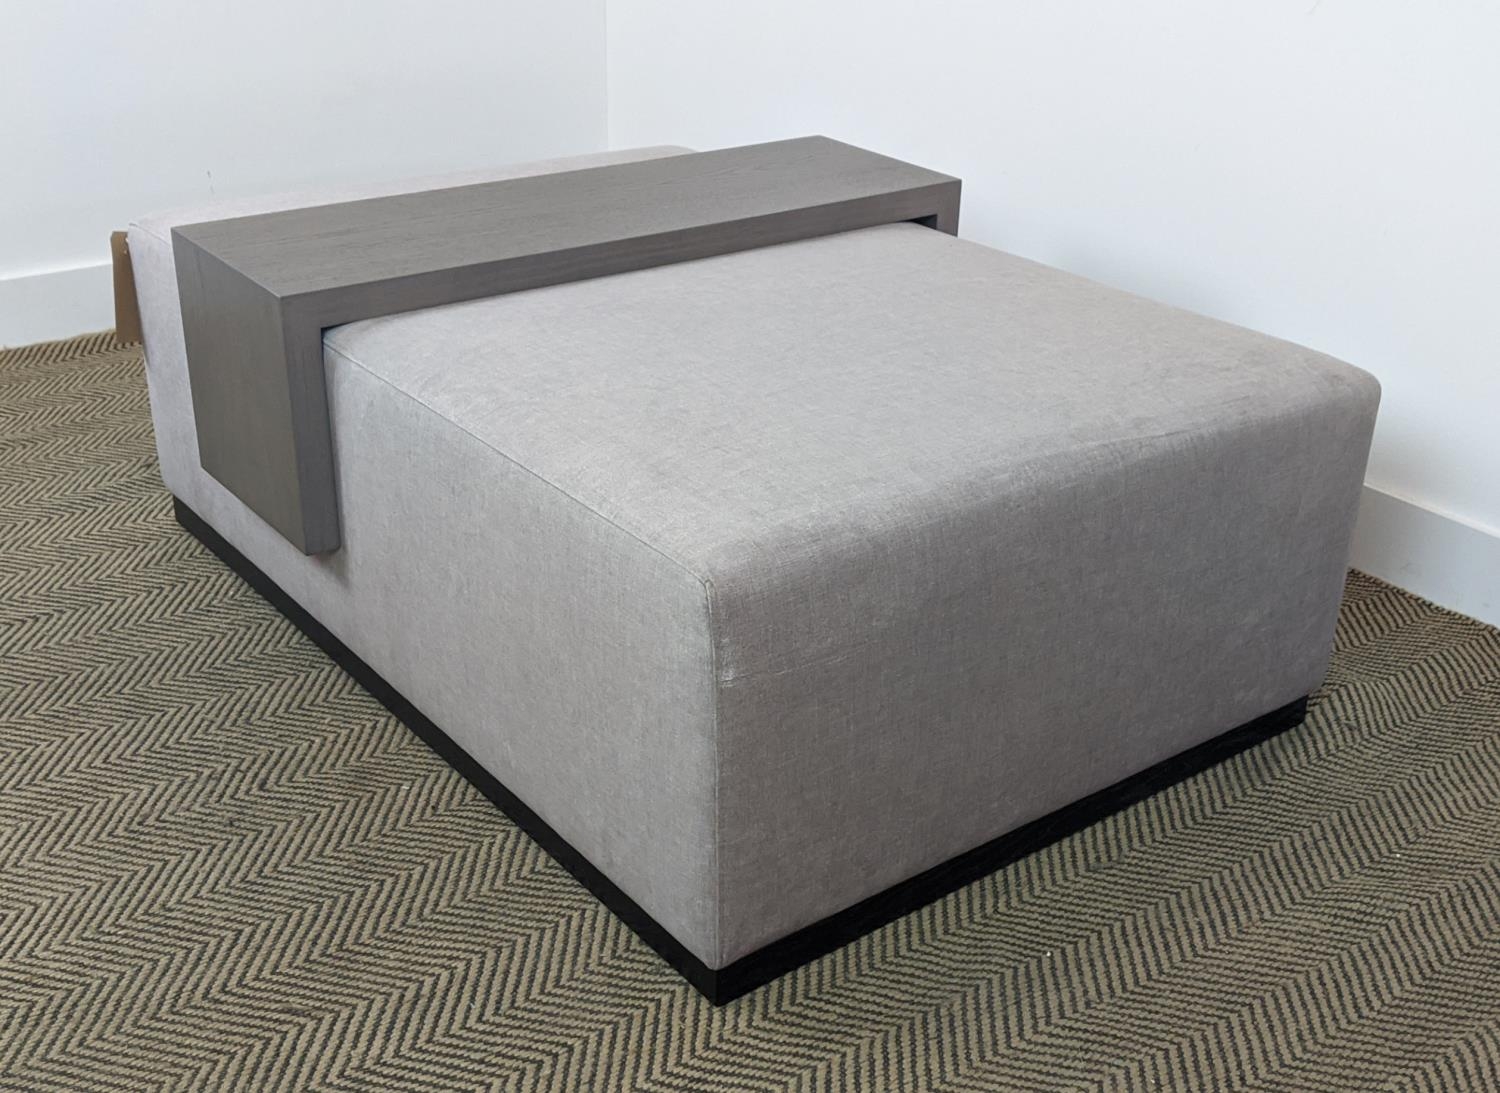 OTTOMAN, grey fabric upholstered, with wooden table that fits over, 120cm x 80cm x 40cm. - Image 3 of 6